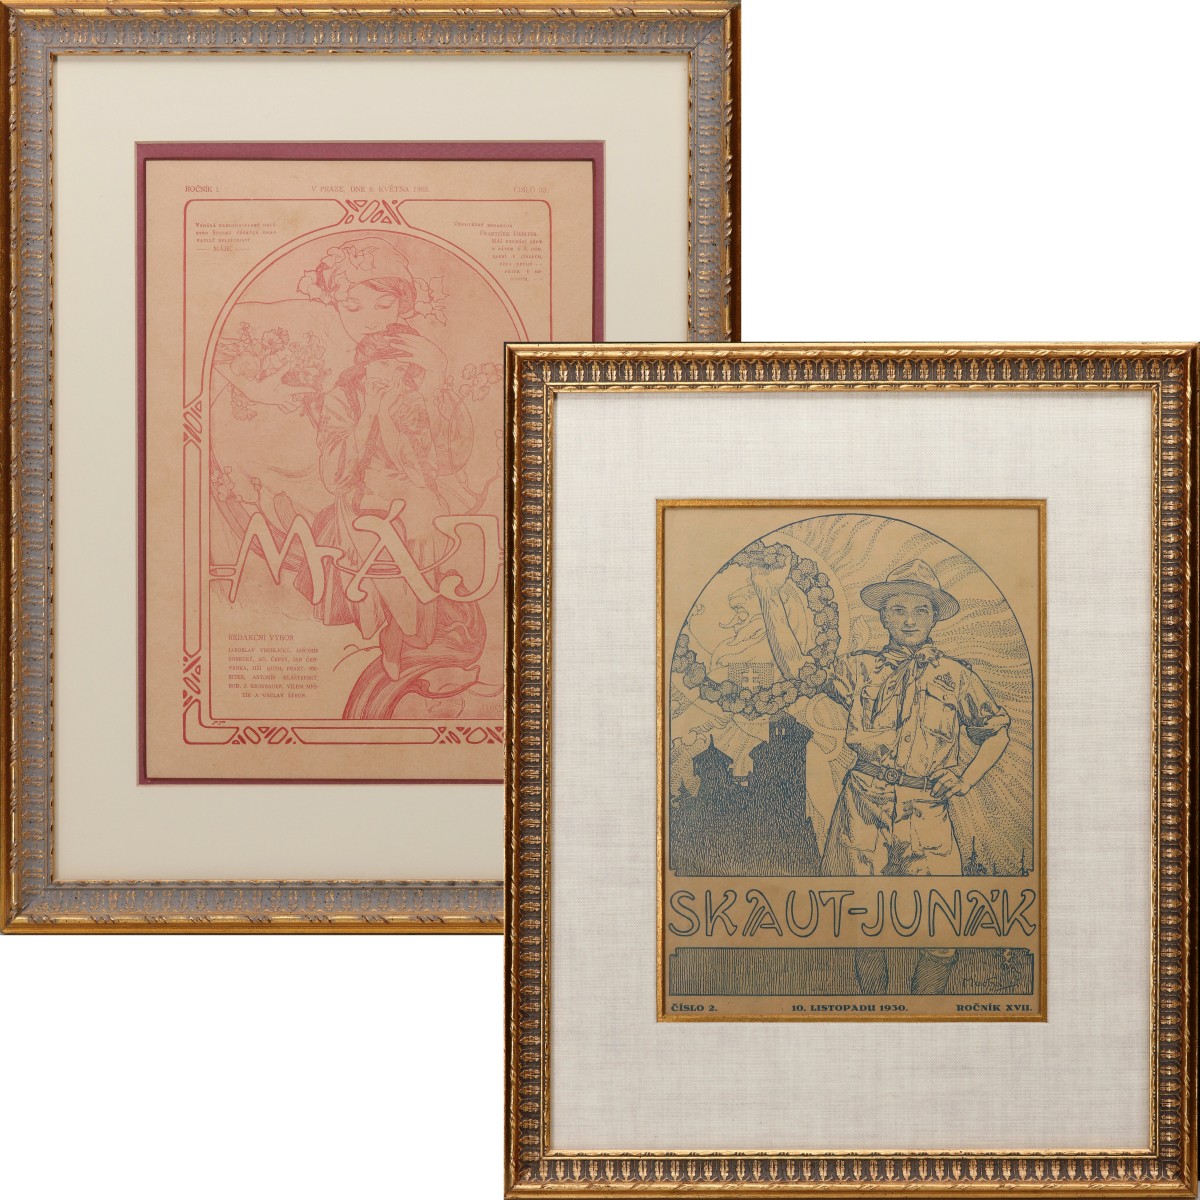 PERIODICAL COVER DESIGNS AFTER ALPHONSE MUCHA